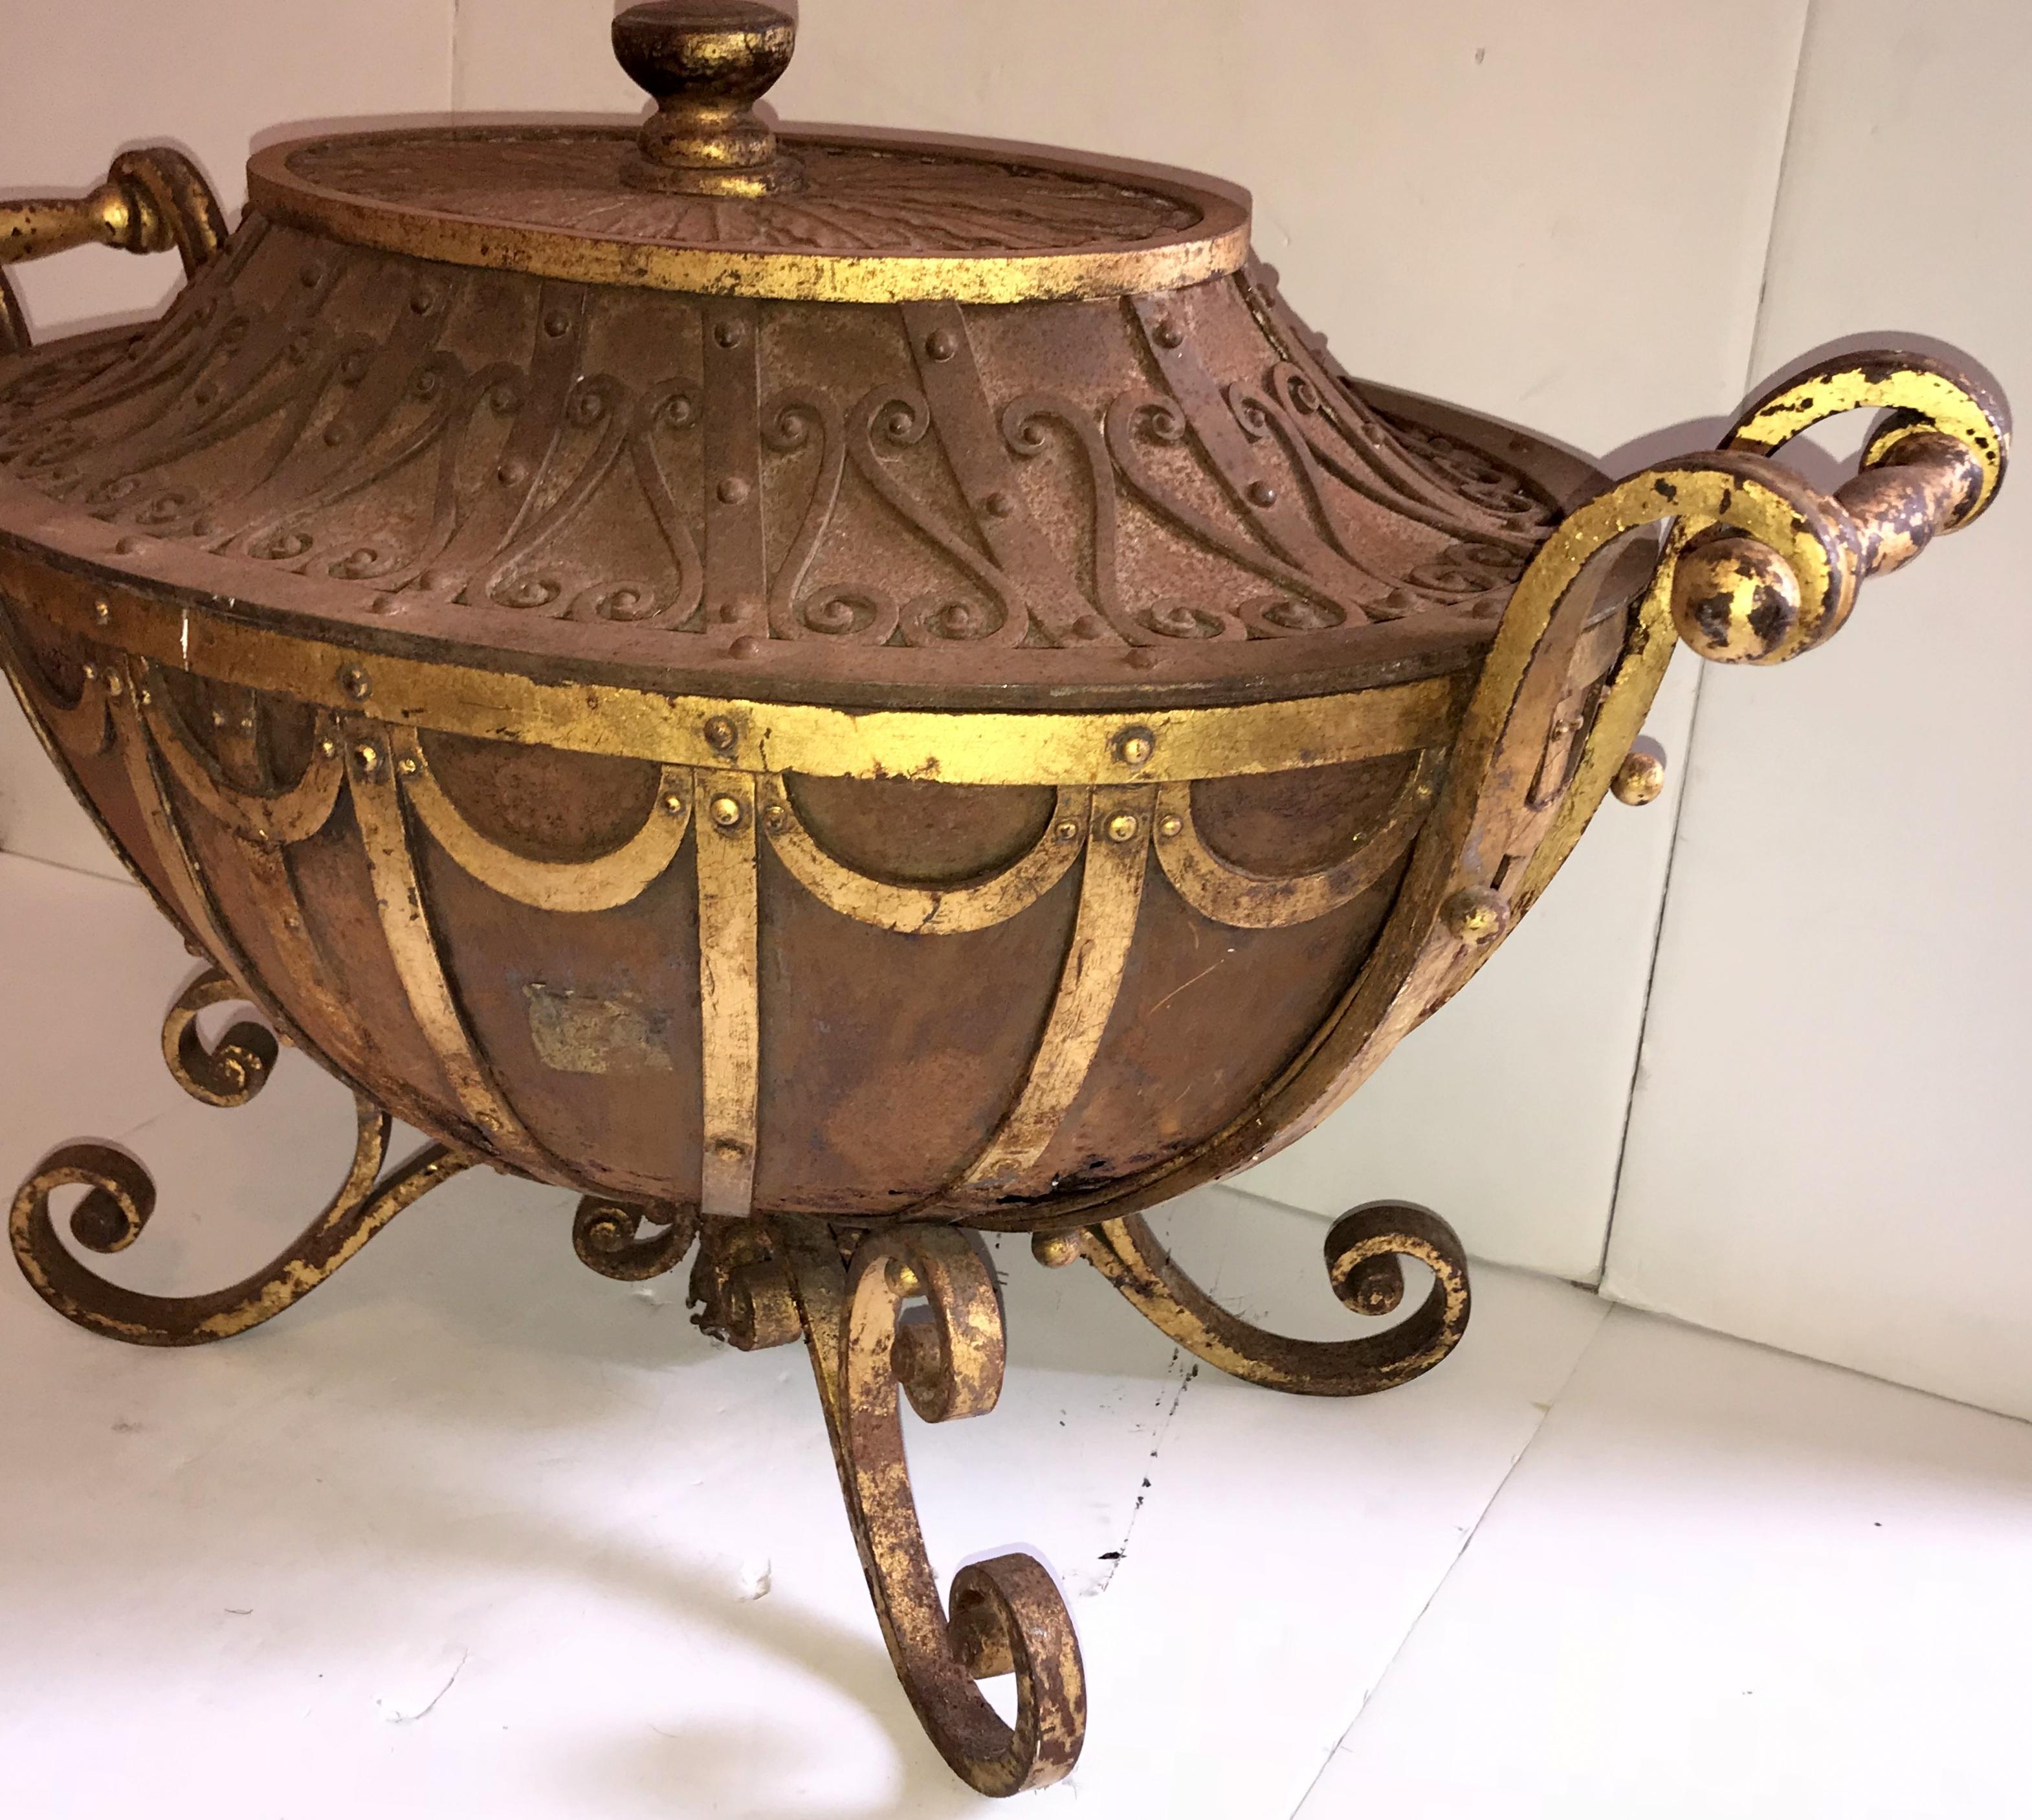 19th Century Handsome English Urn Edwardian Regency Large Swag Neoclassical Coal Scuttle For Sale